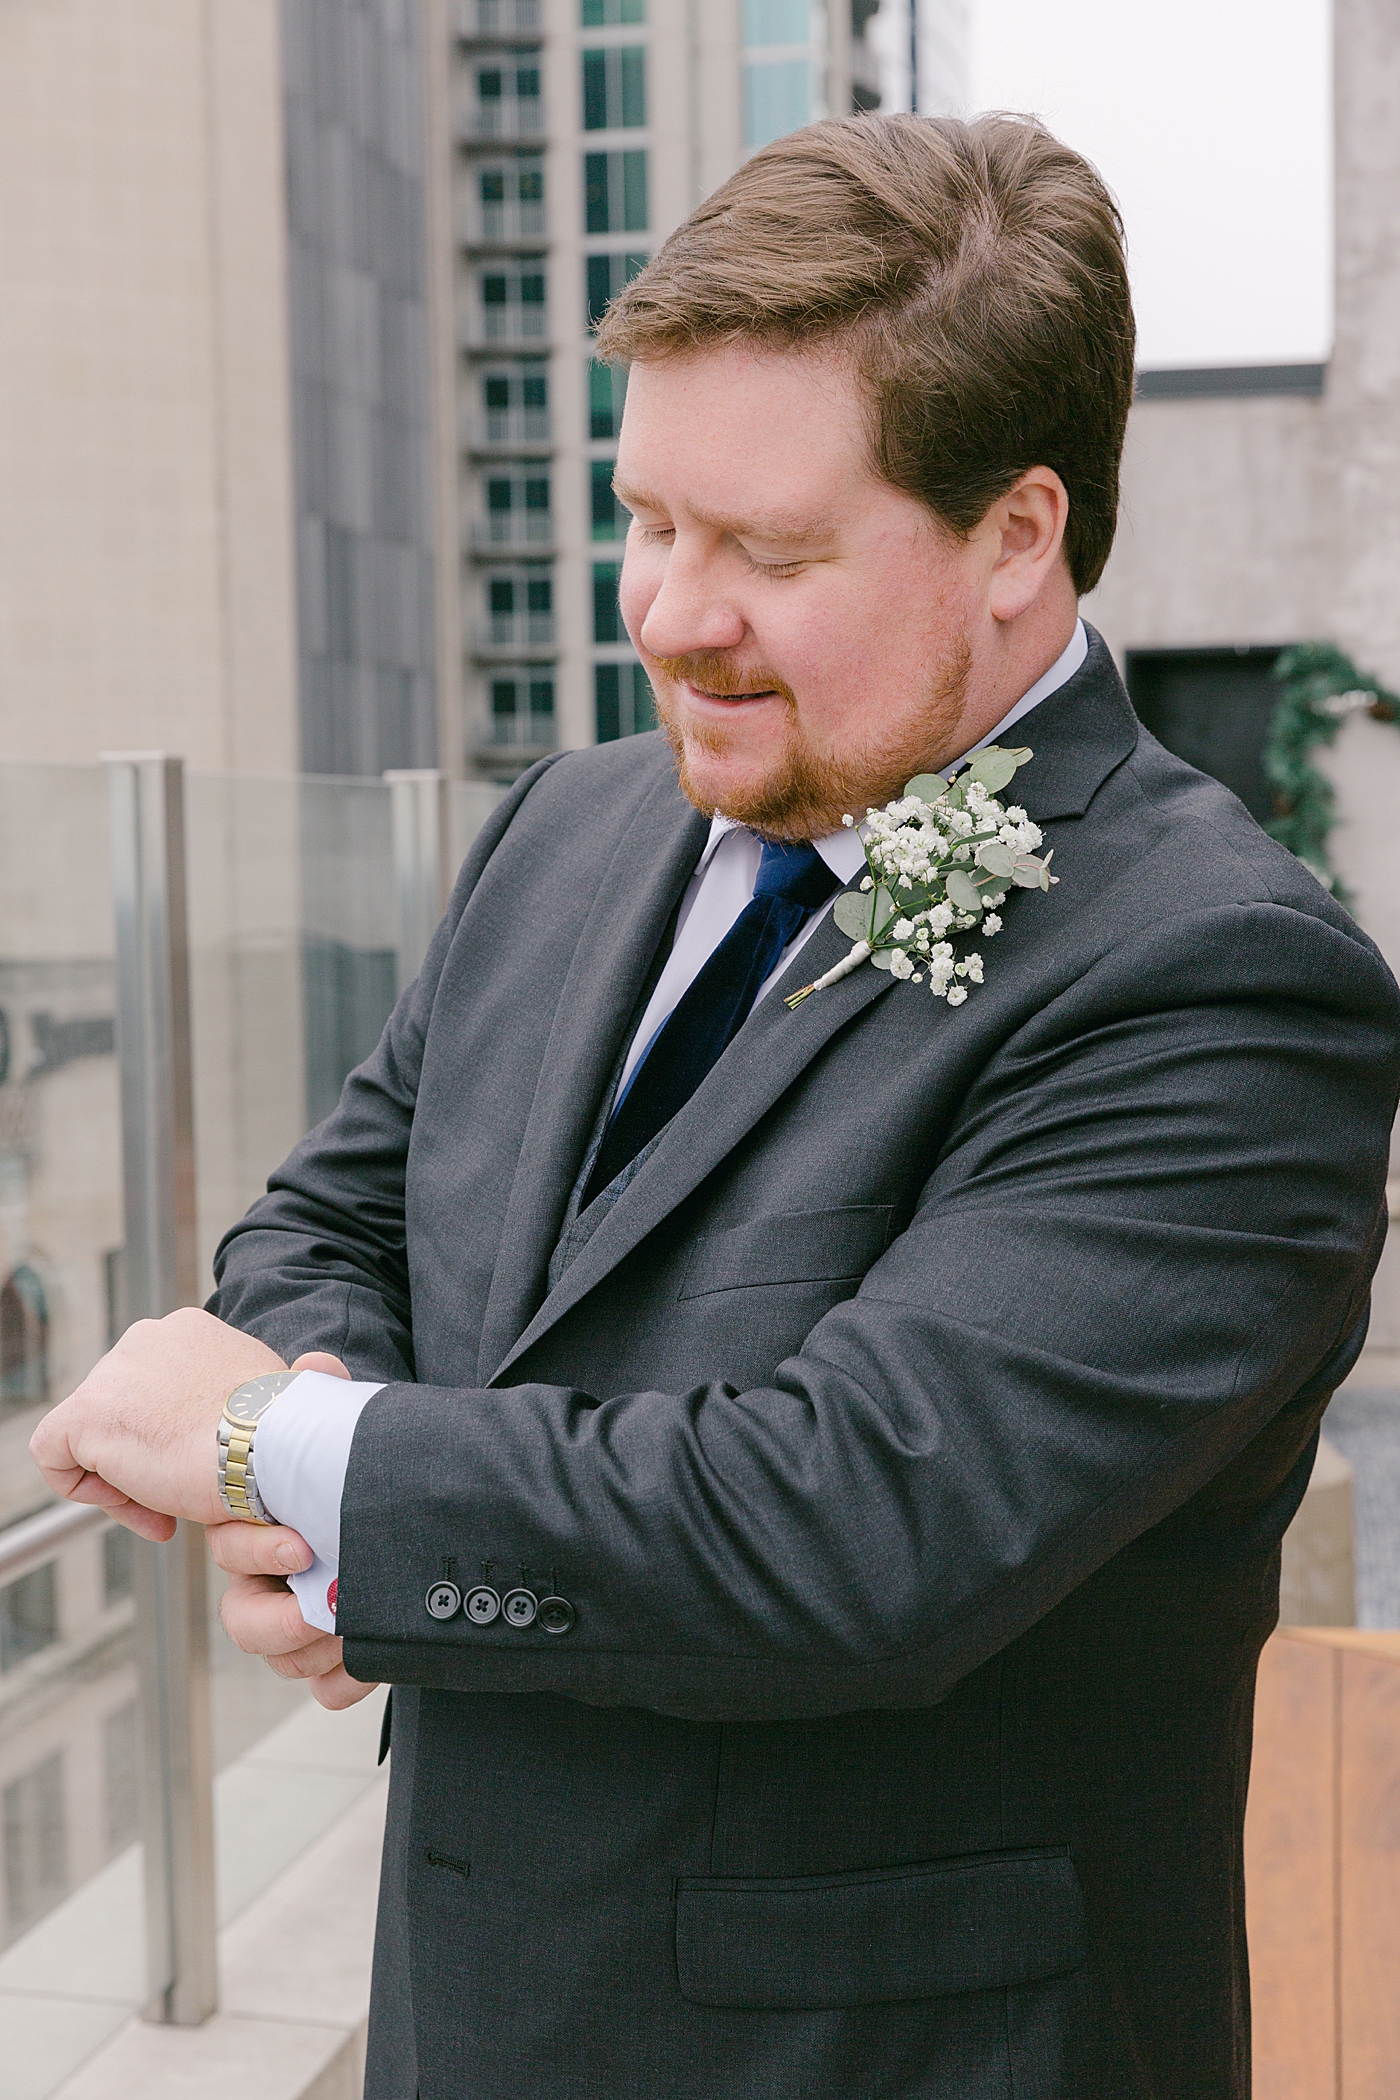 Groom adjusting his cufflinks | Photo by Hope Helmuth Photography